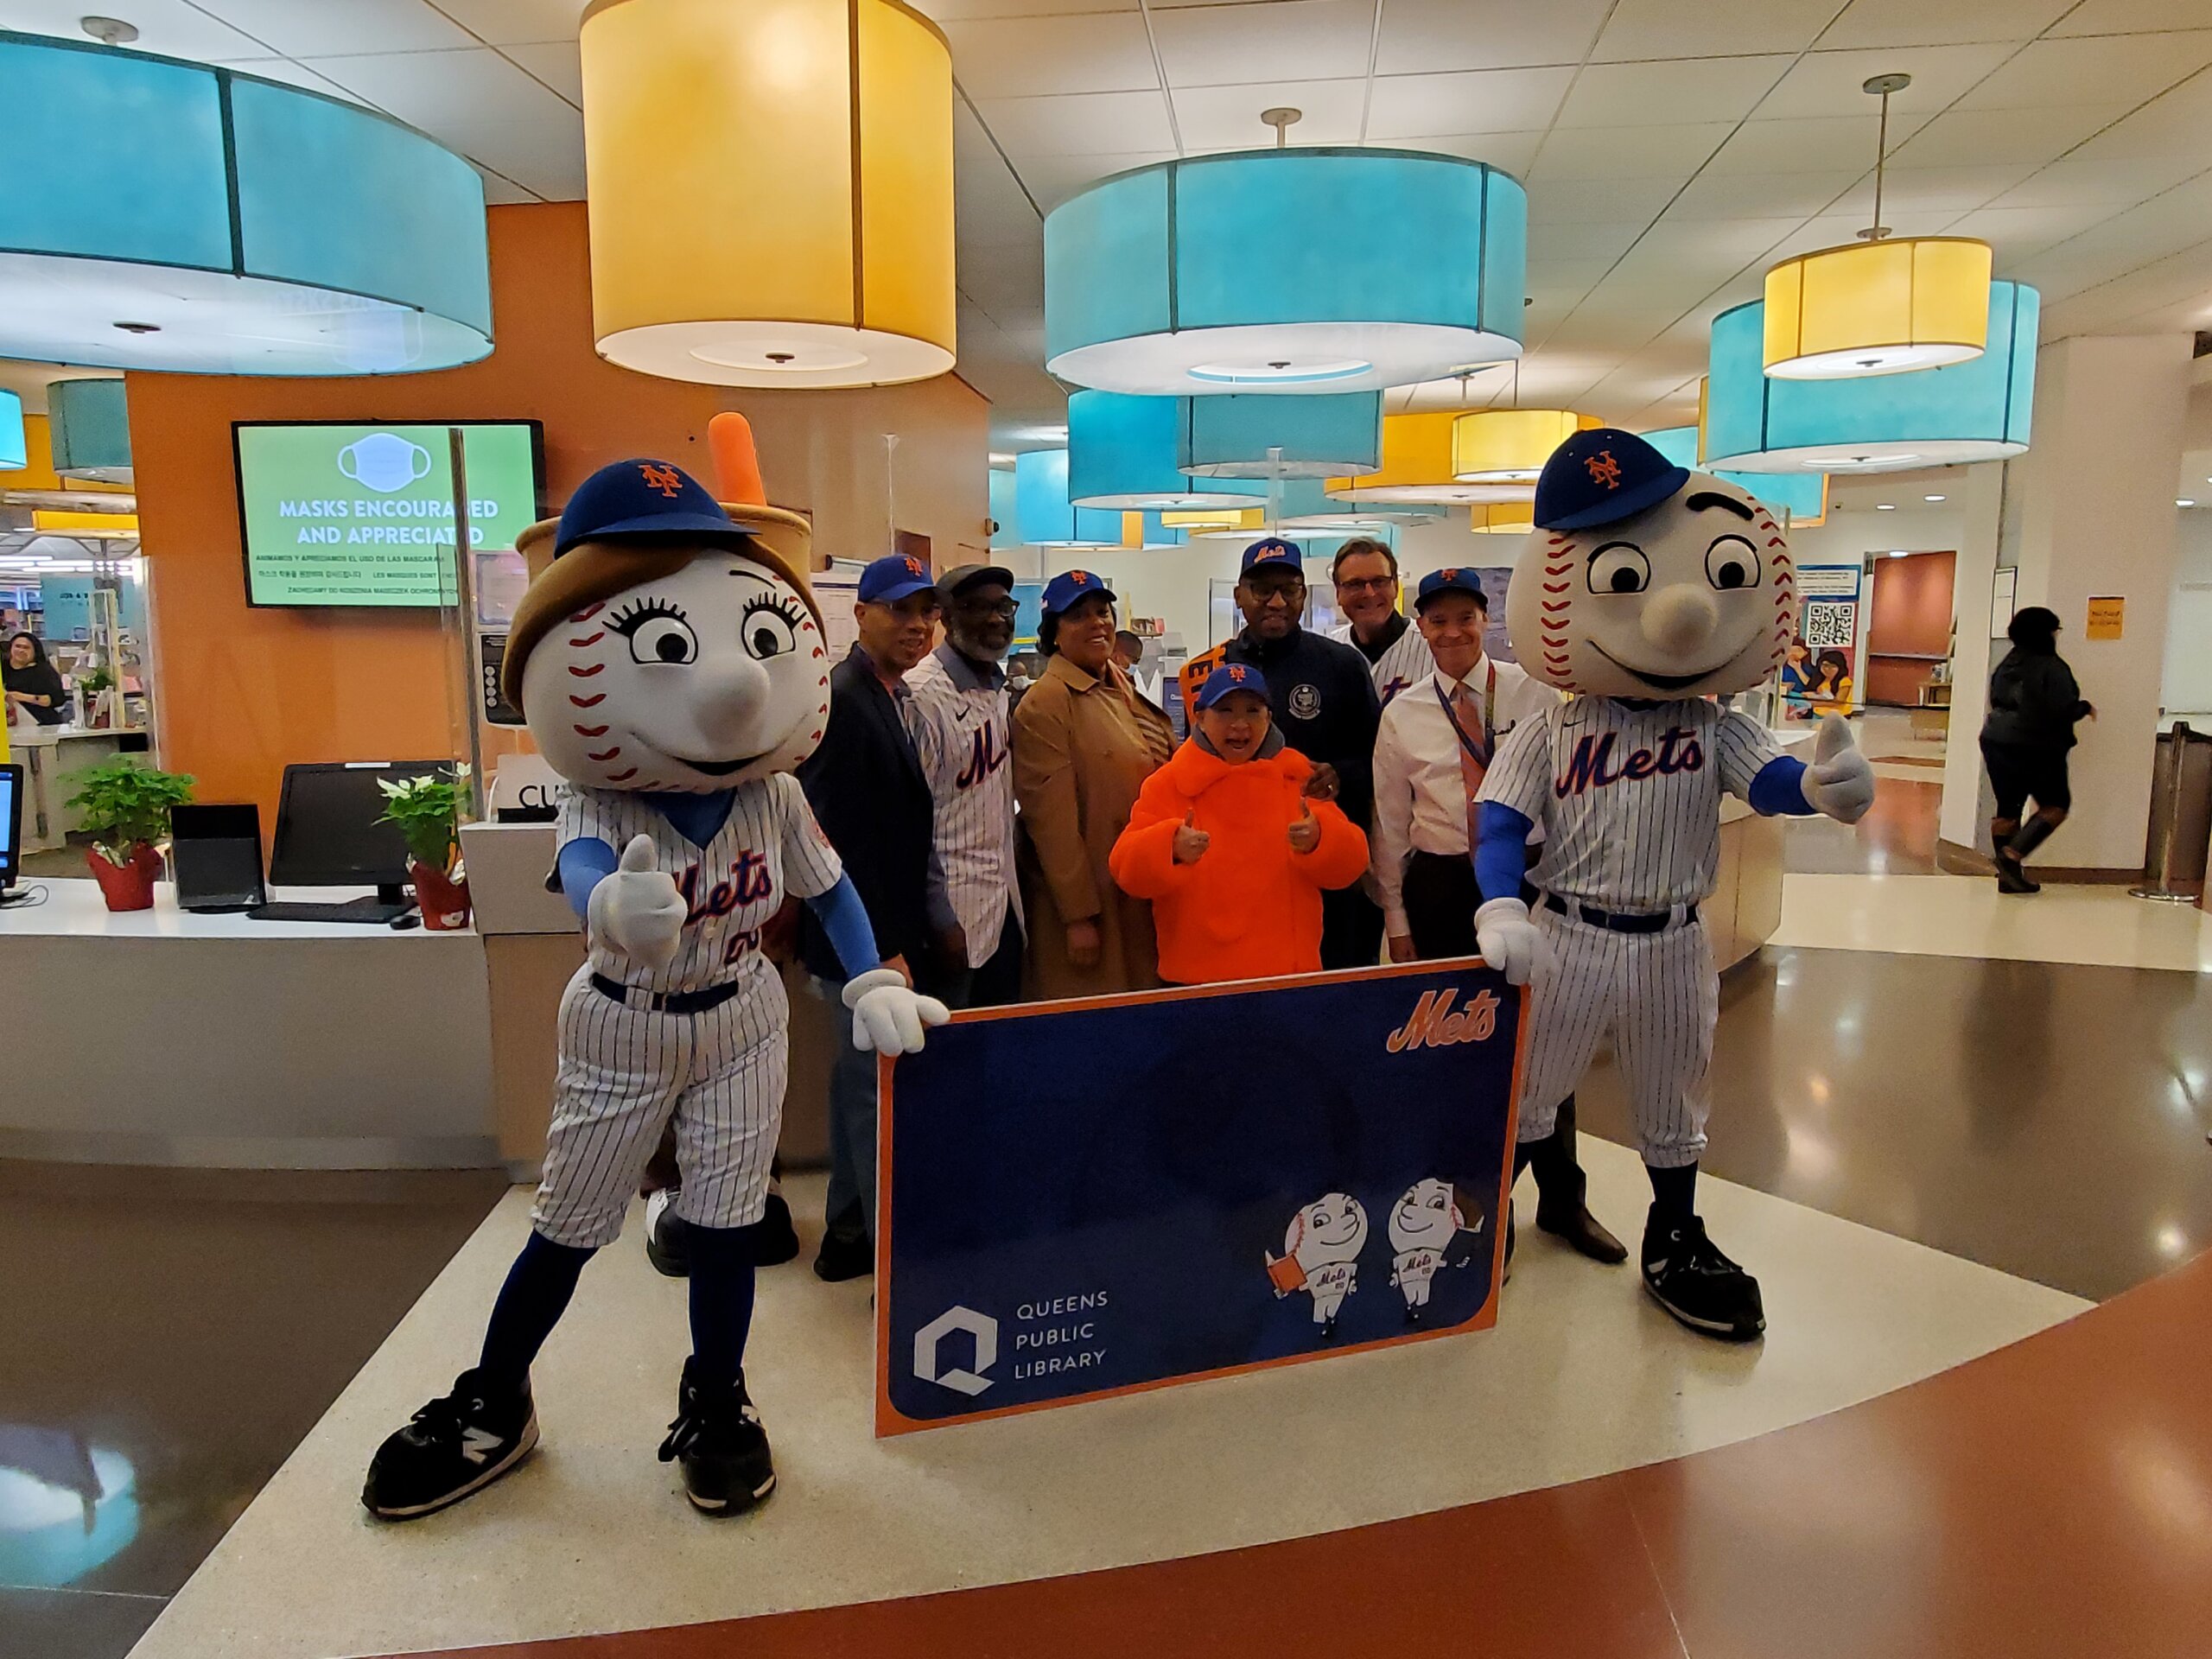 New York Mets - Marshalls is surprising Mets fans at home